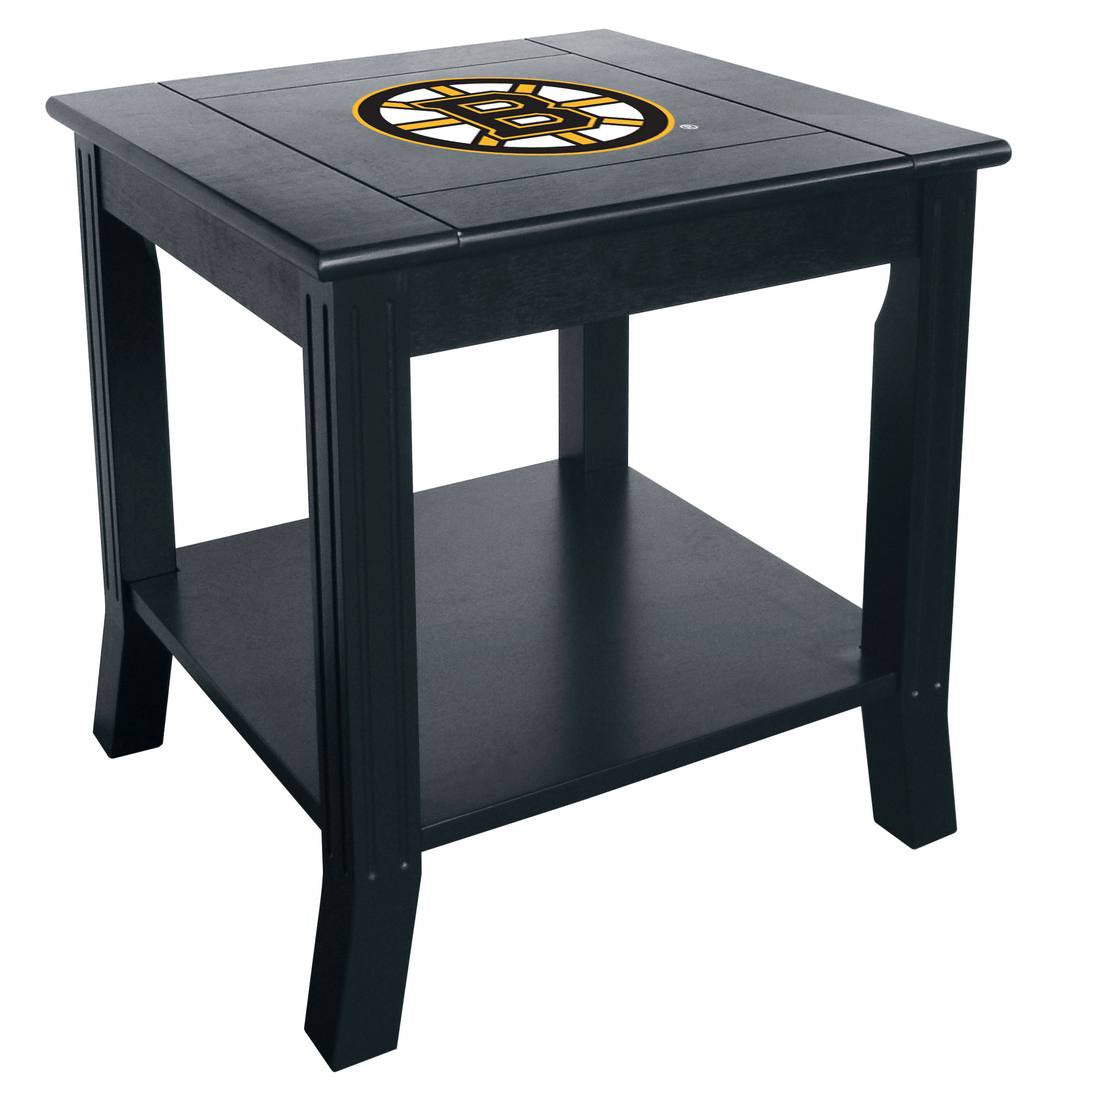 Imperial Boston Bruins Side Table